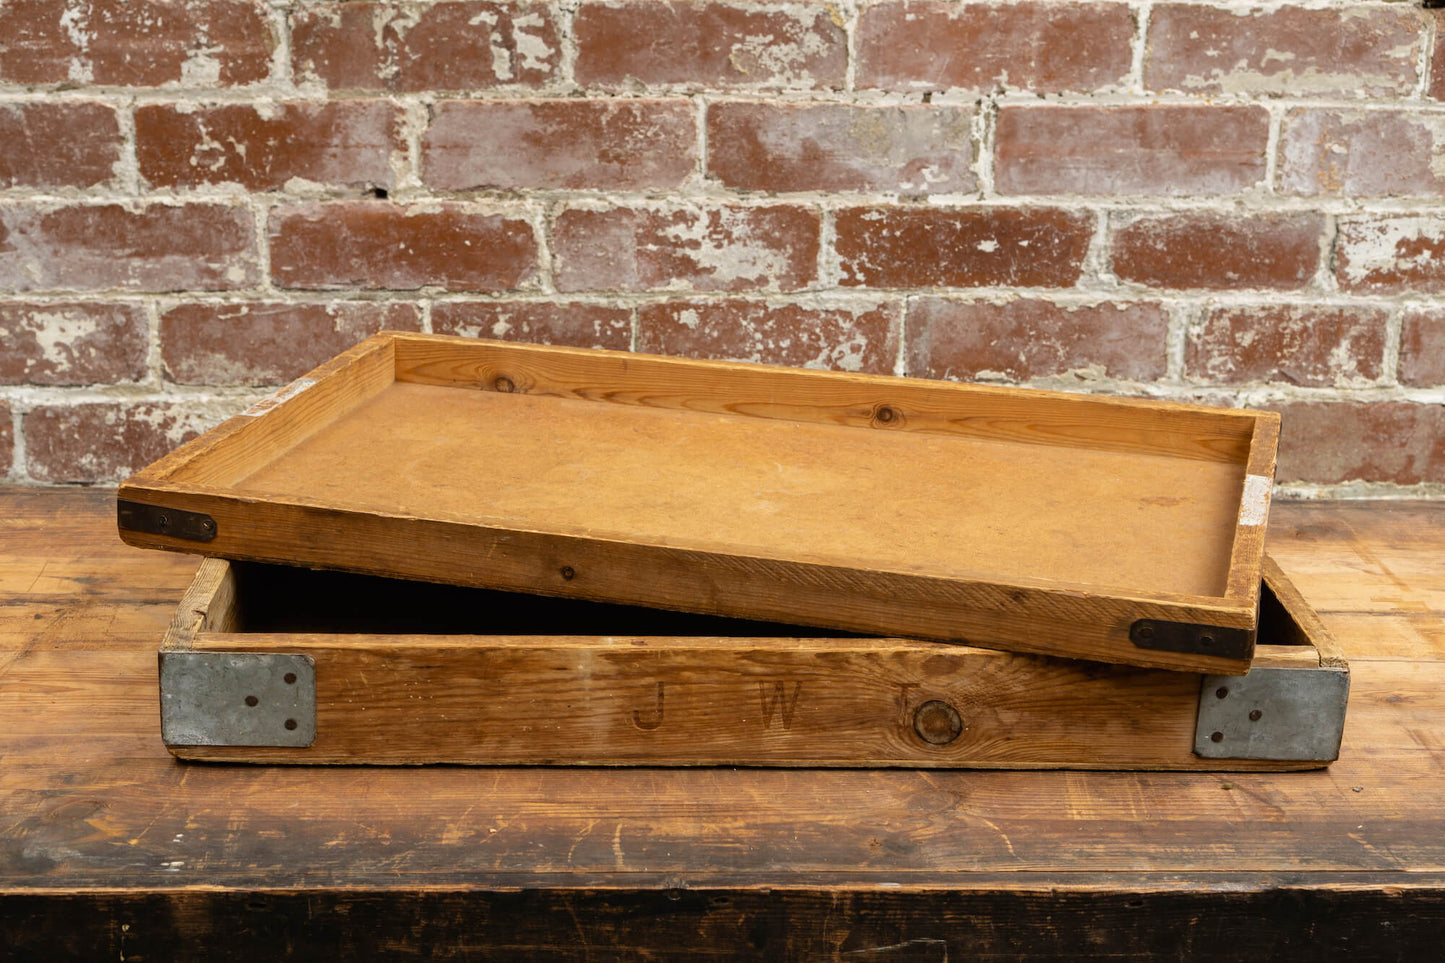 Photo shows a vintage selection of wooden seed trays atop a table. The background is a red rustic brick wall.